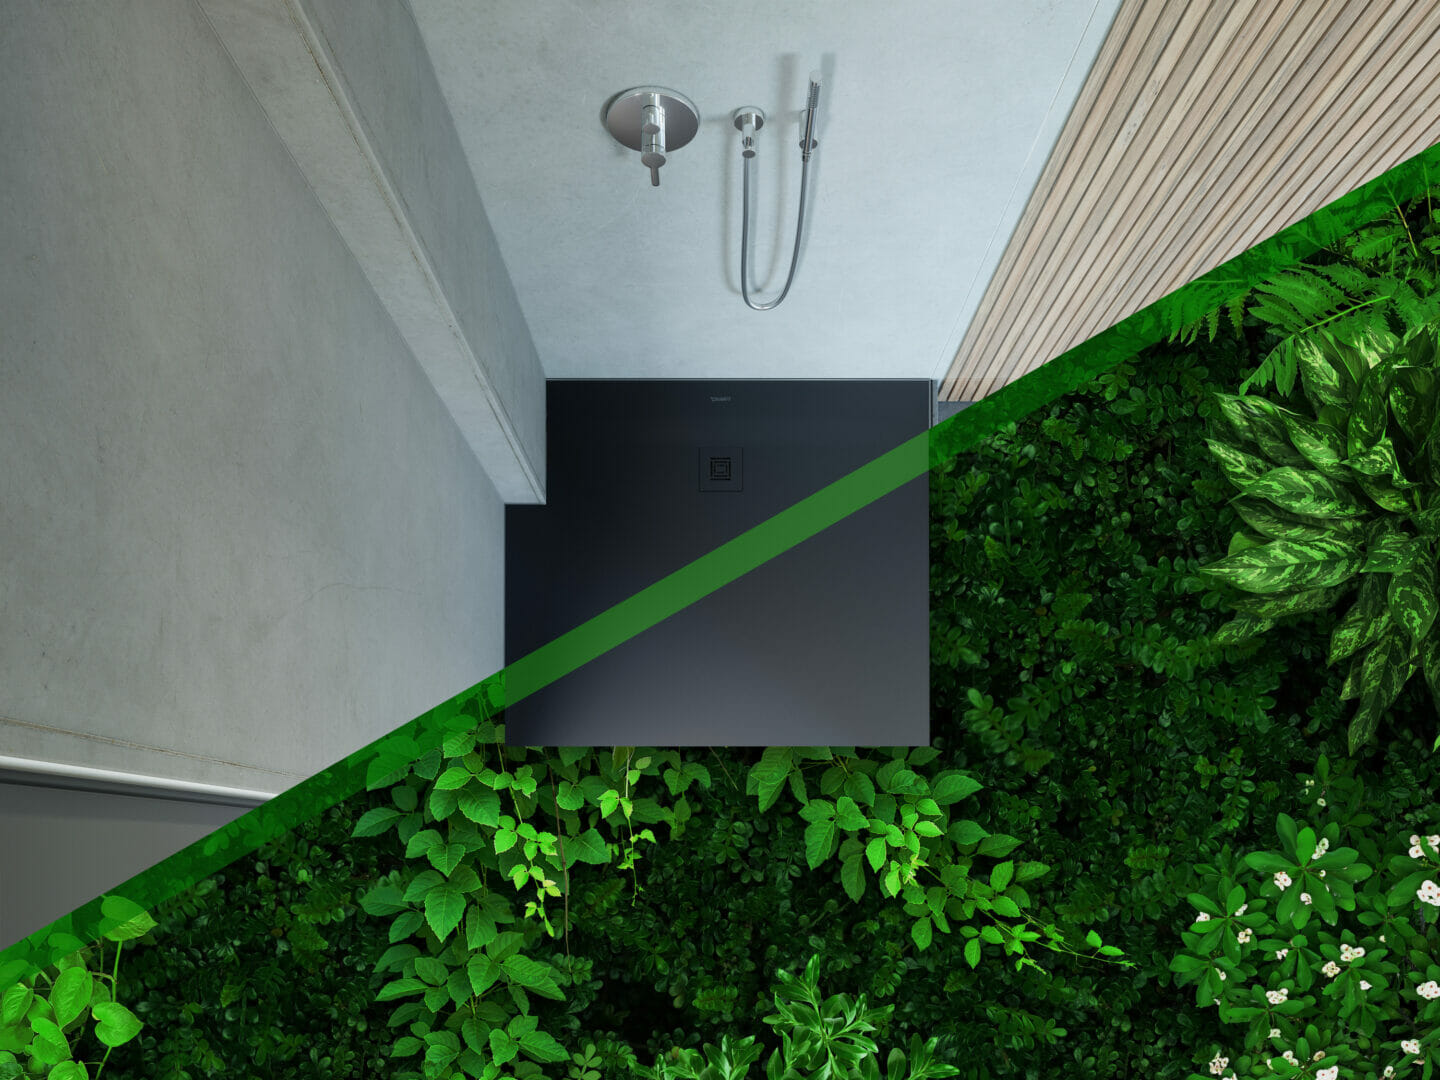 SUSTAINABLE AND DURABLE: MATERIALS IN THE BATHROOM